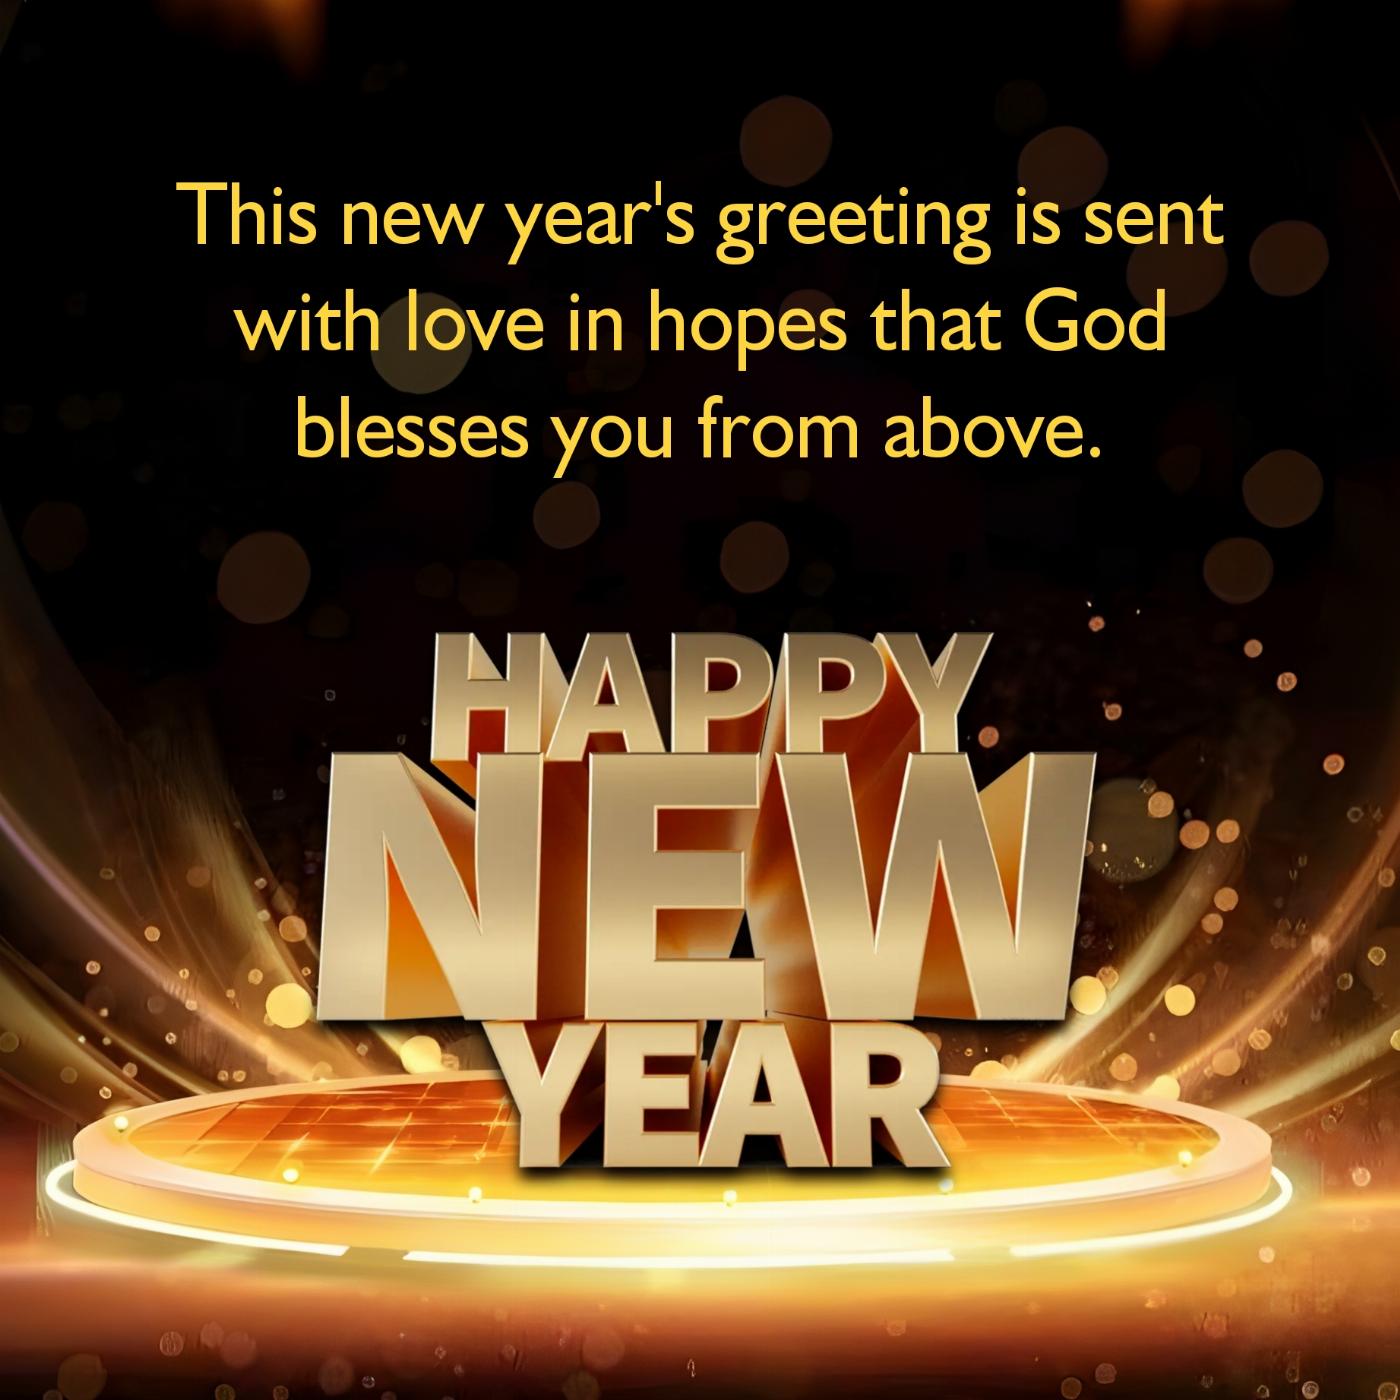 This new year's greeting is sent with love in hopes